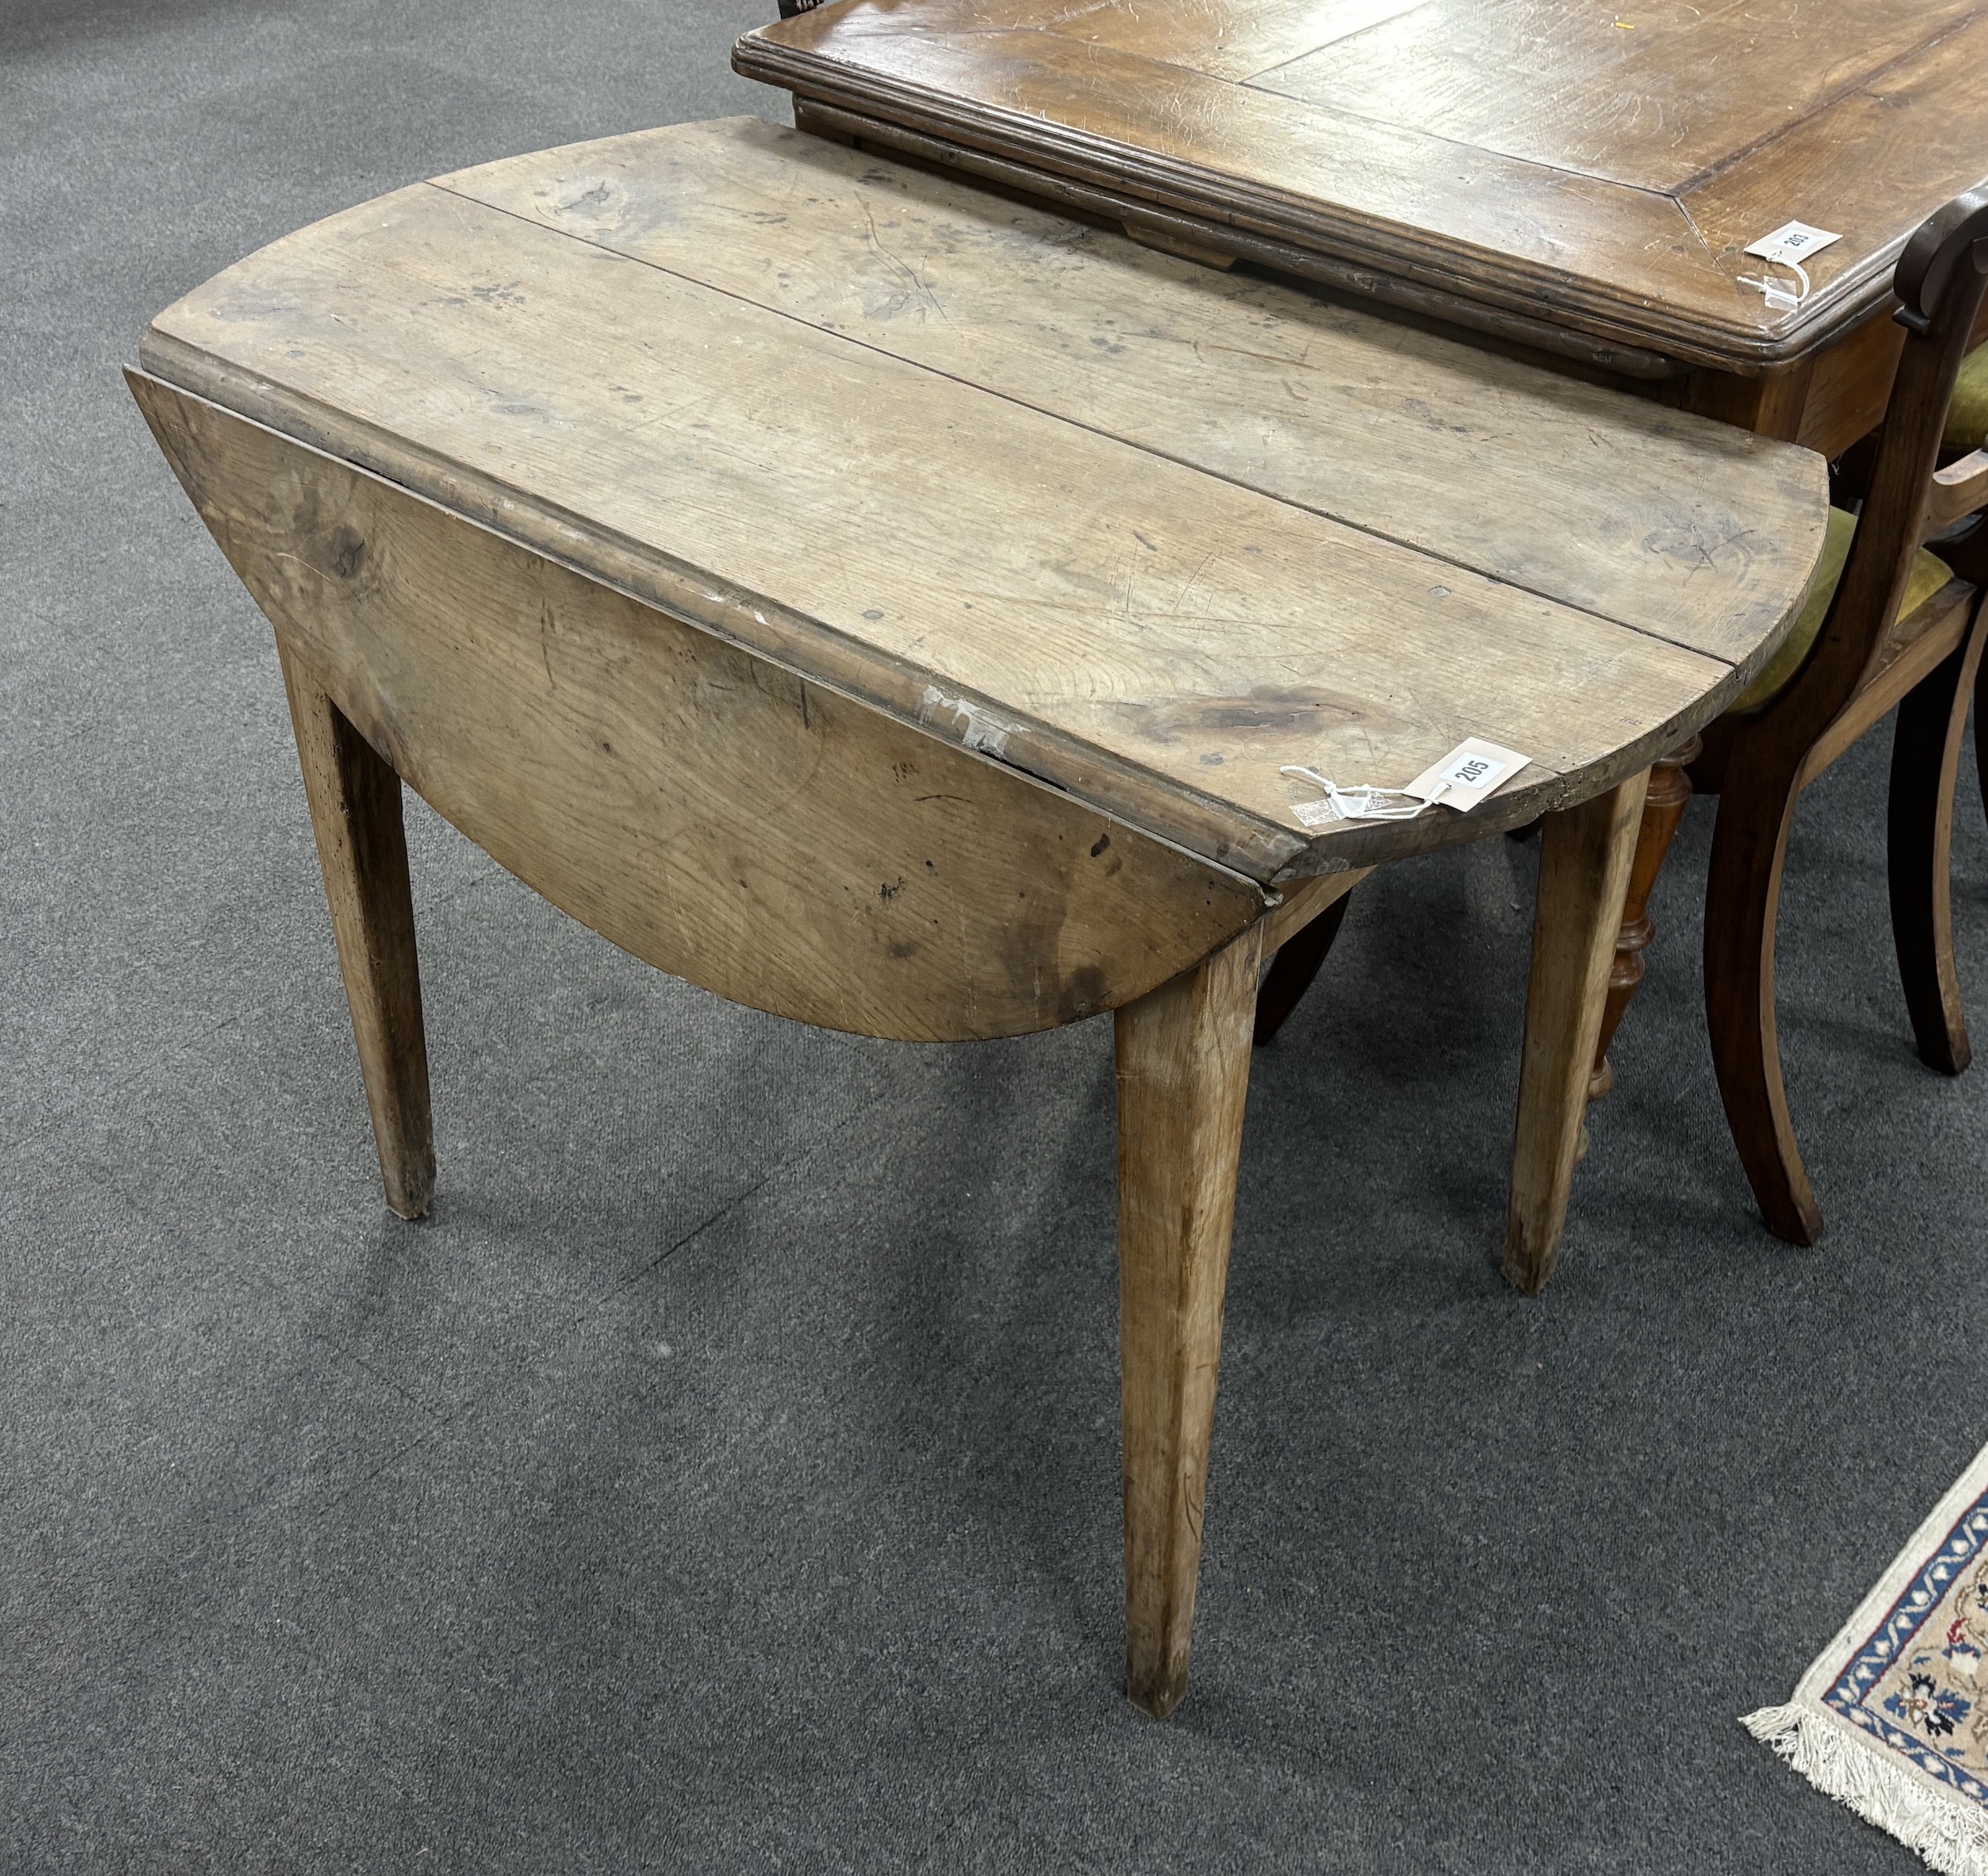 A 19th century French cherry drop leaf kitchen table, width 104cm, depth 58cm, height 72cm